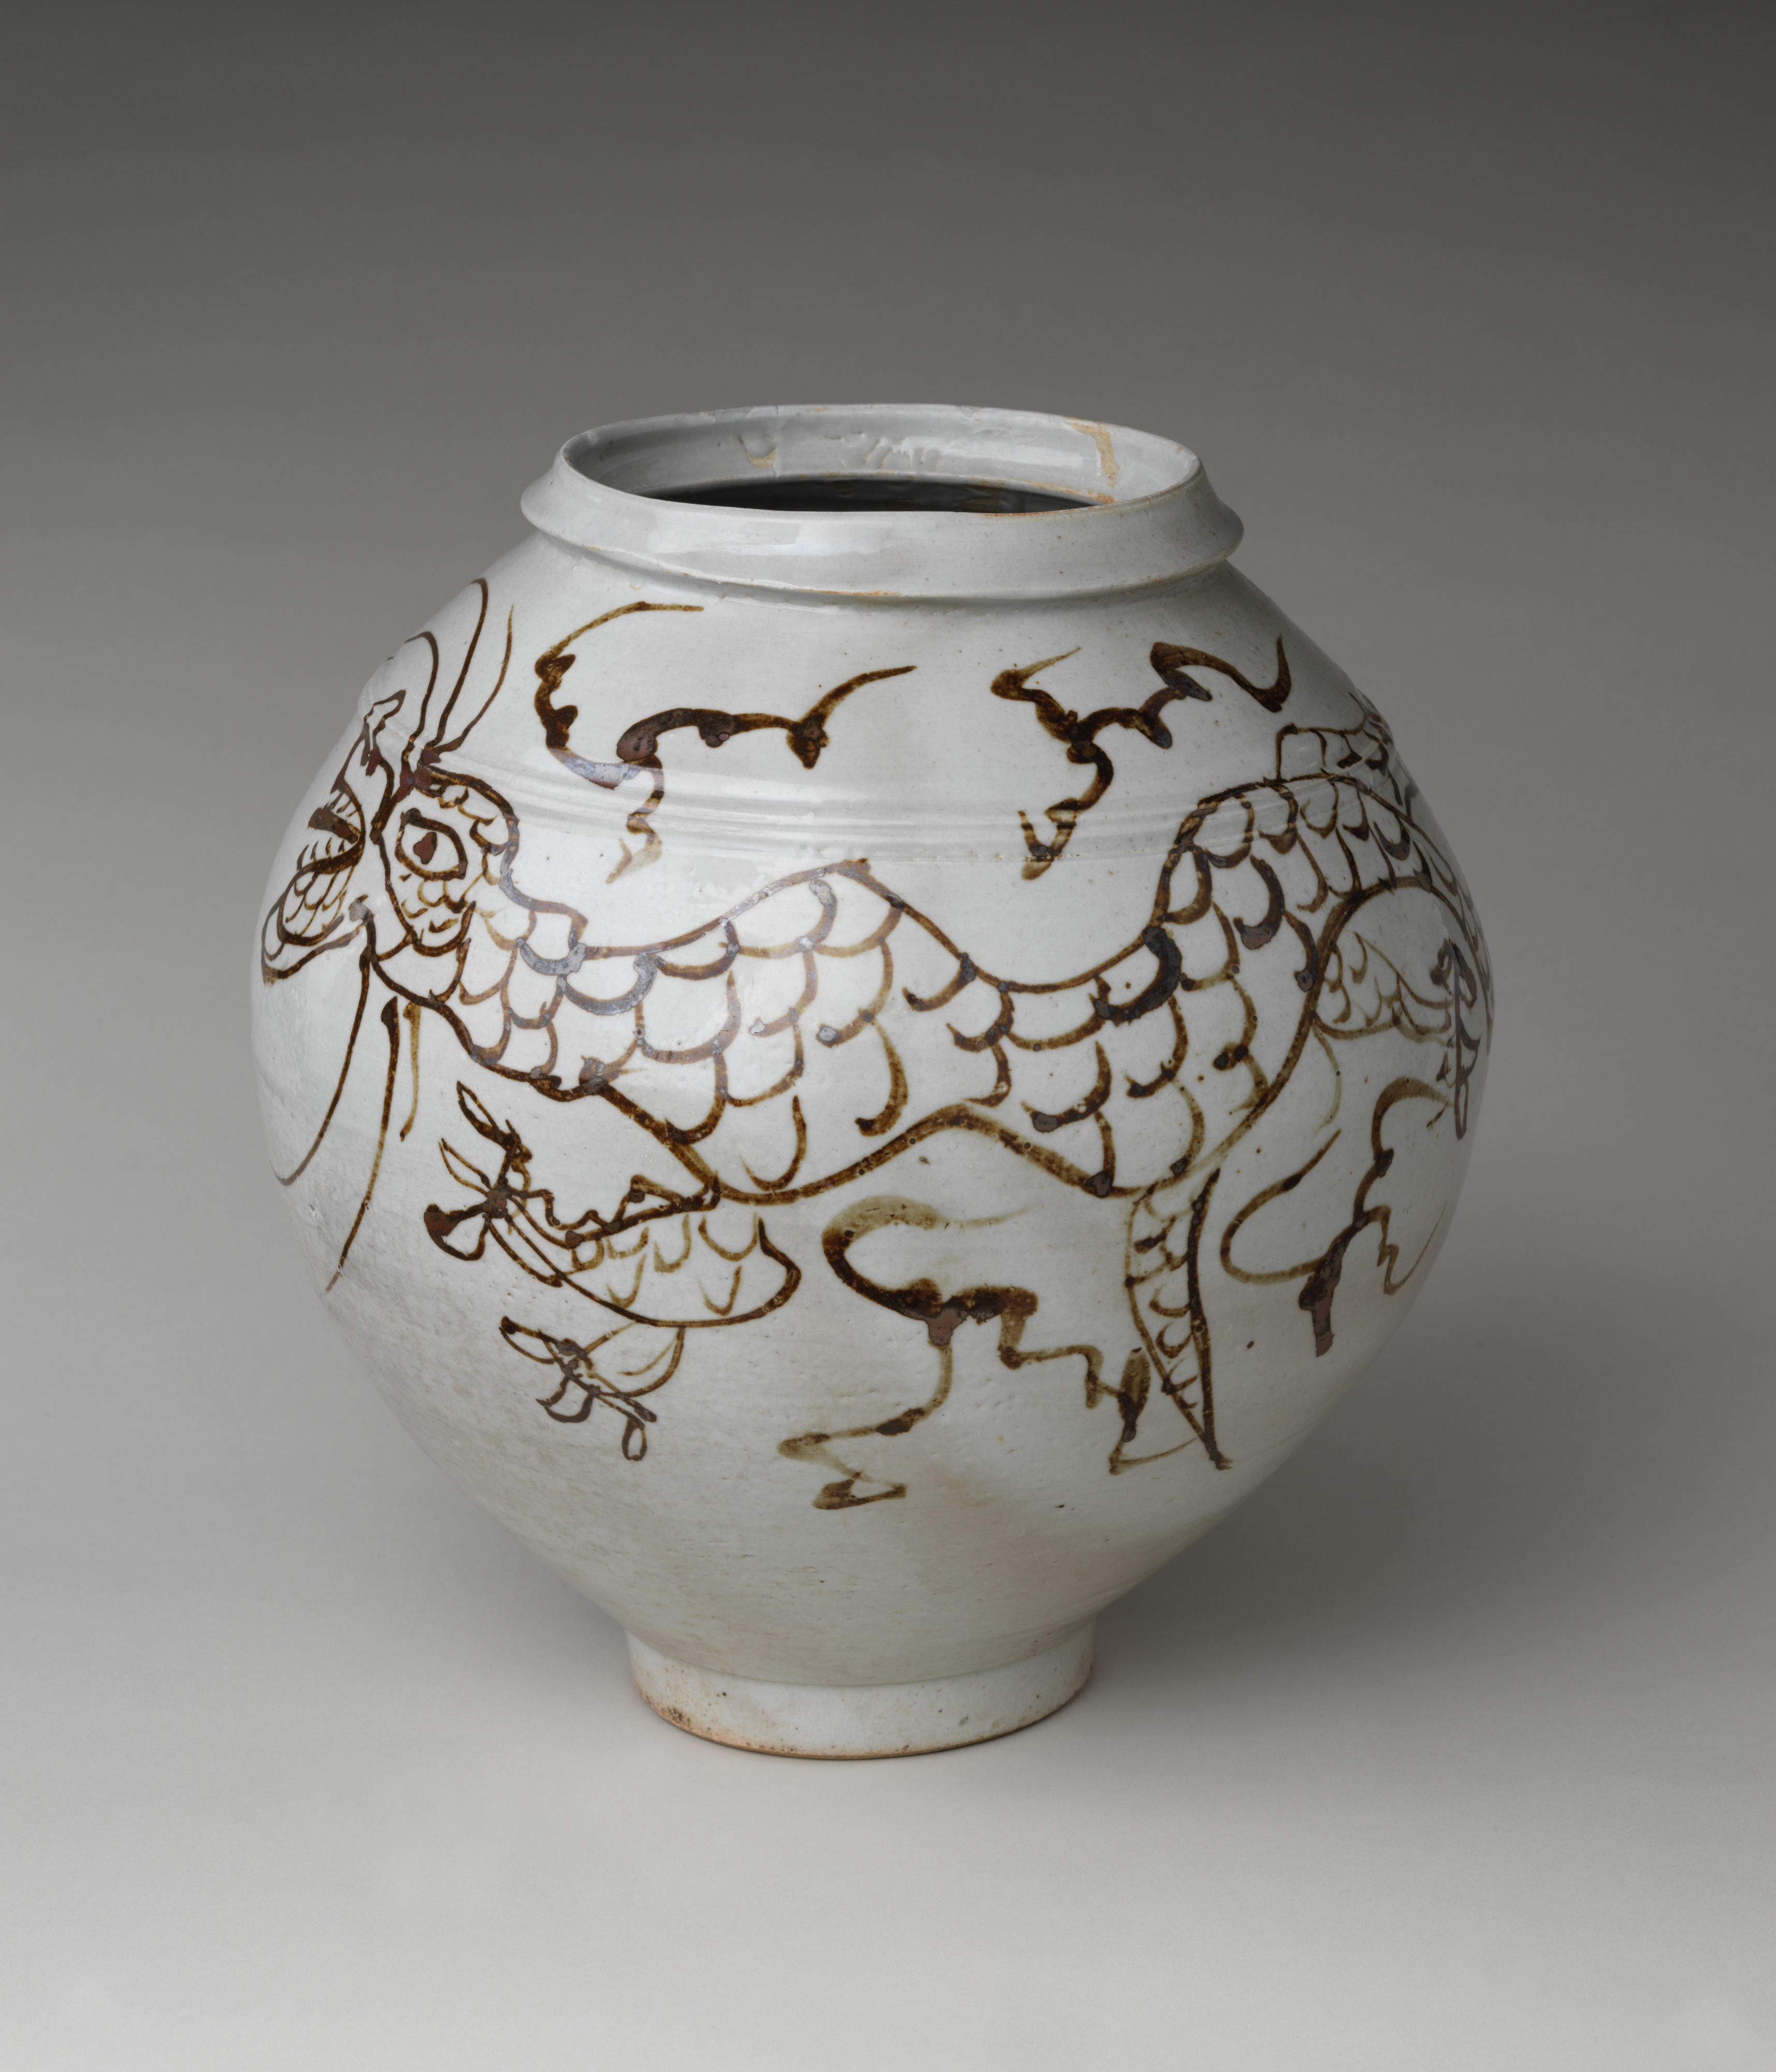 An underglaze-red 'birds' faceted jar, Joseon dynasty, 18th century, SUBLIME BEAUTY: Korean Ceramics from a Private Collection, 2022